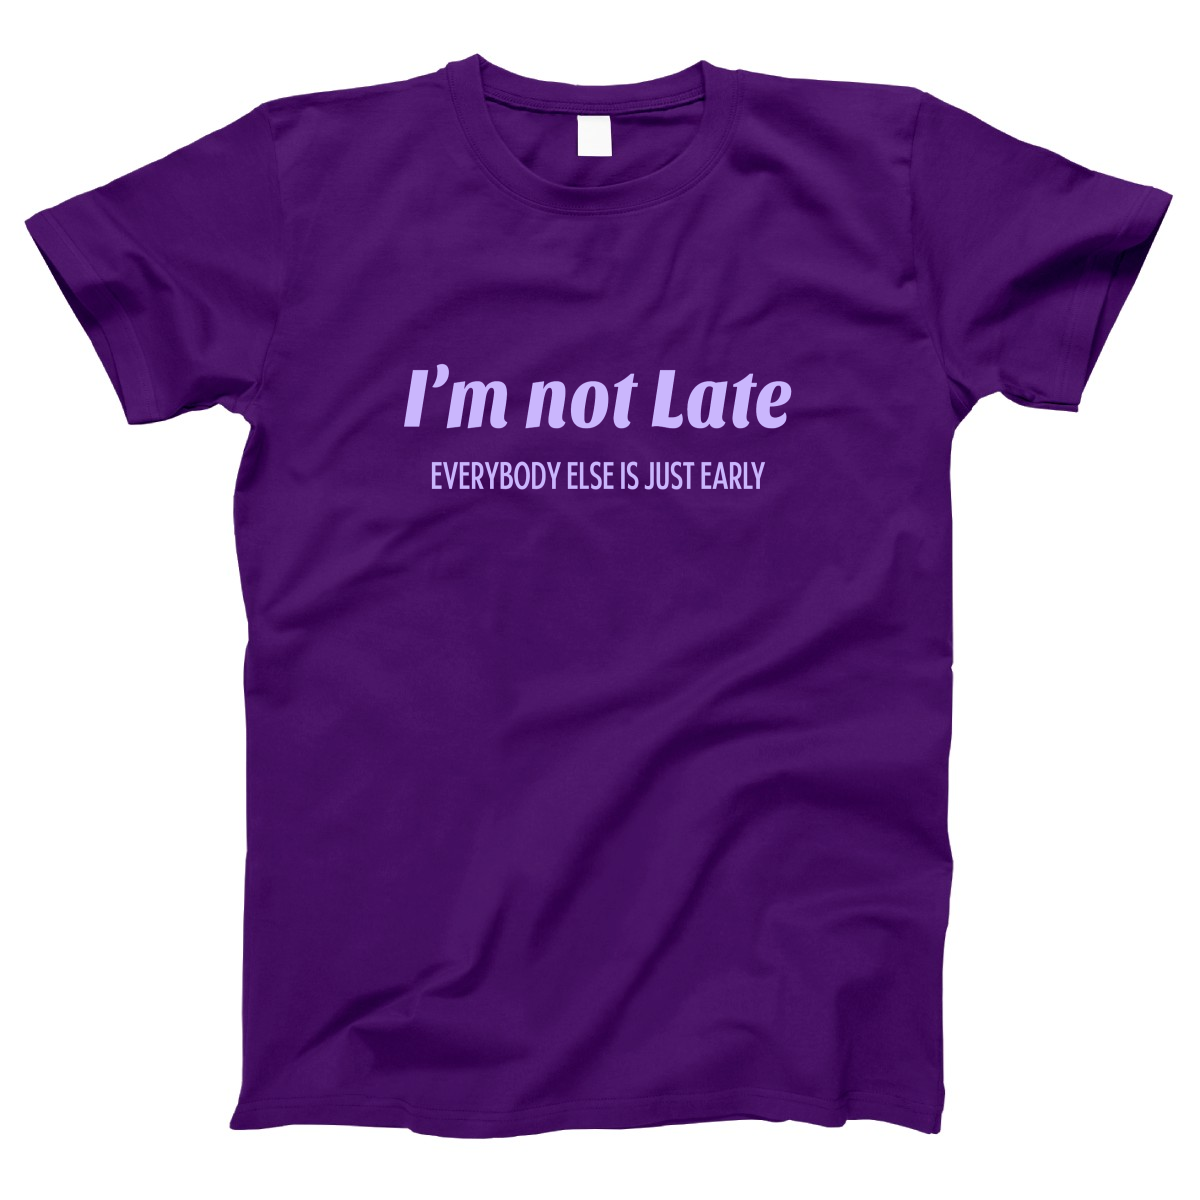 I’m not late everybody else is just early Women's T-shirt | Purple